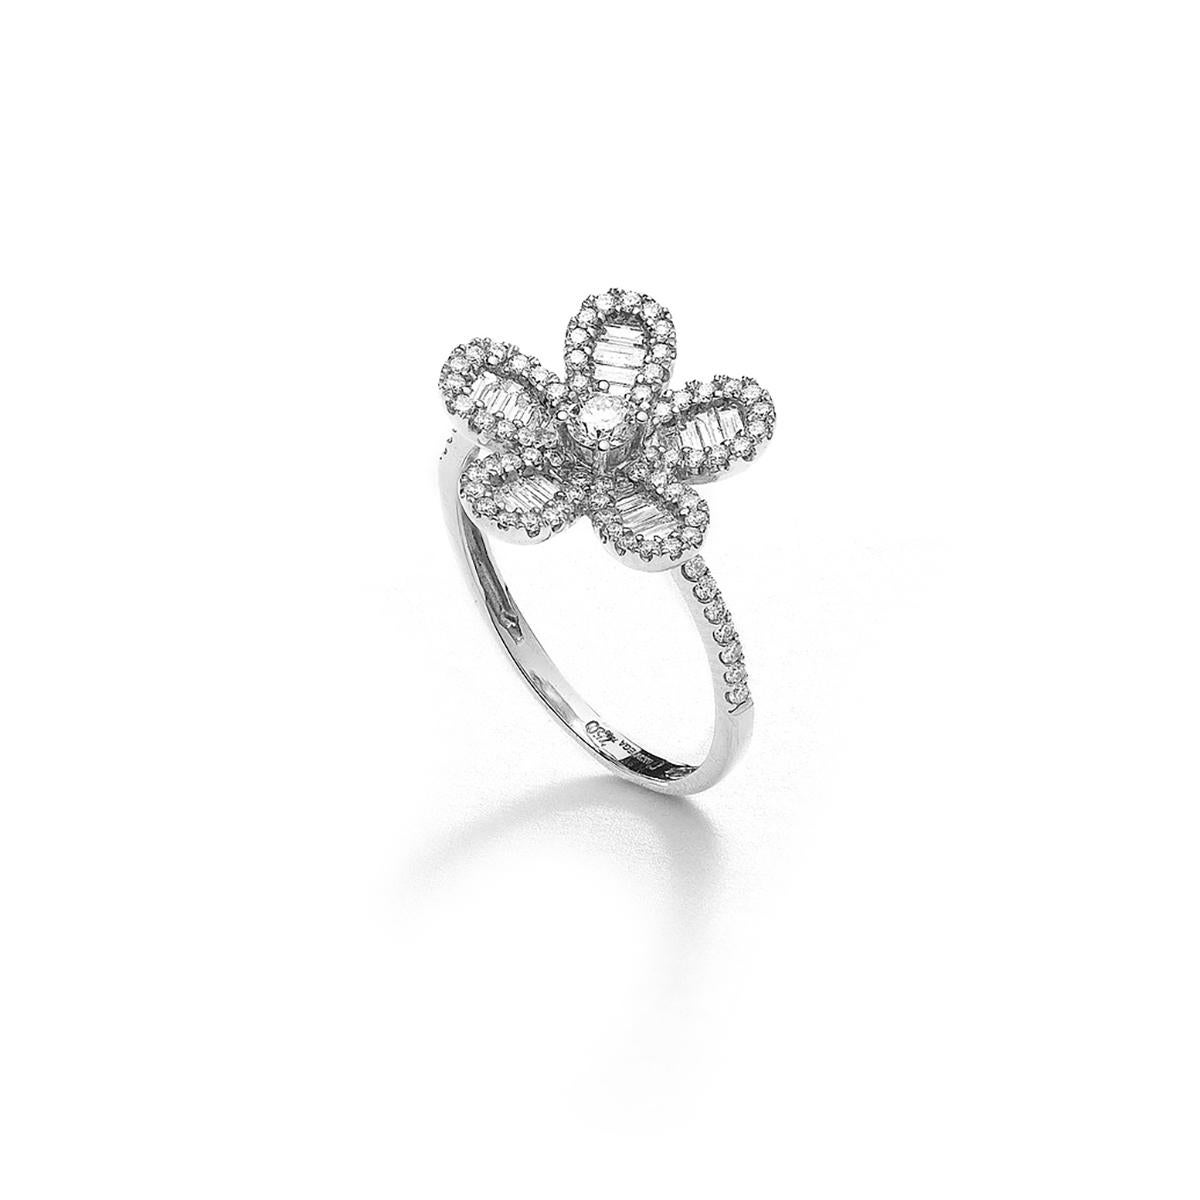 Flower ring in 18kt white gold set with 80 diamonds 0.44 cts and 20 baguette cut diamonds 0.23 cts Size 54